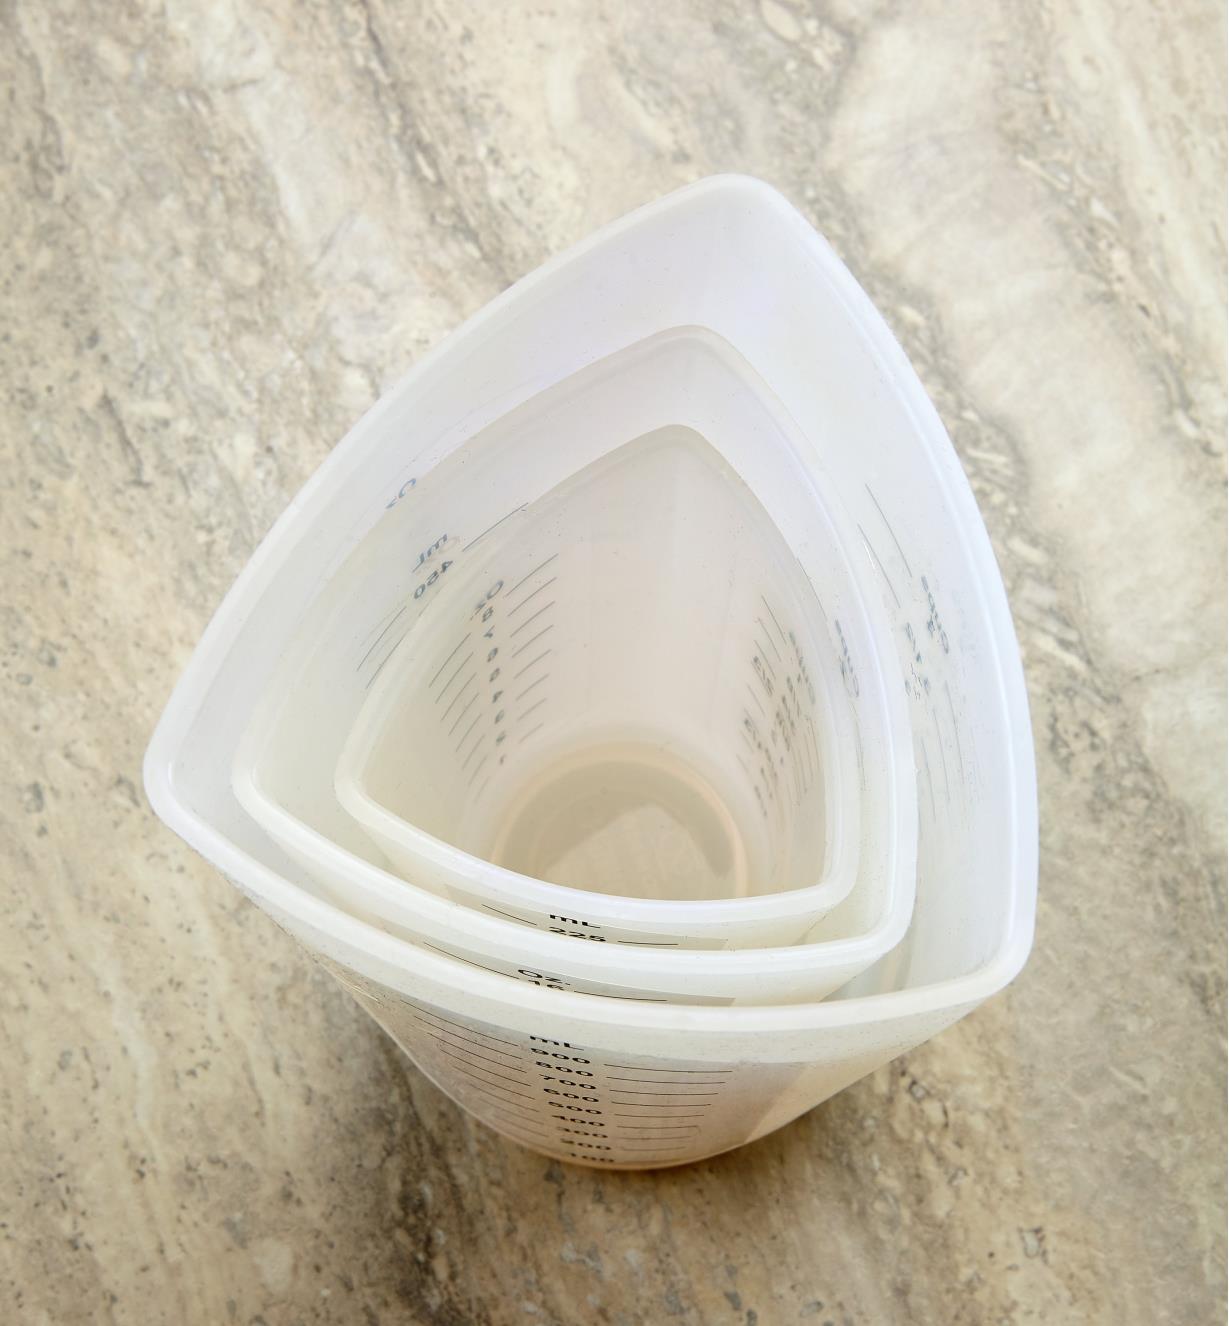 Overhead view of three nested flexible silicone measuring cups